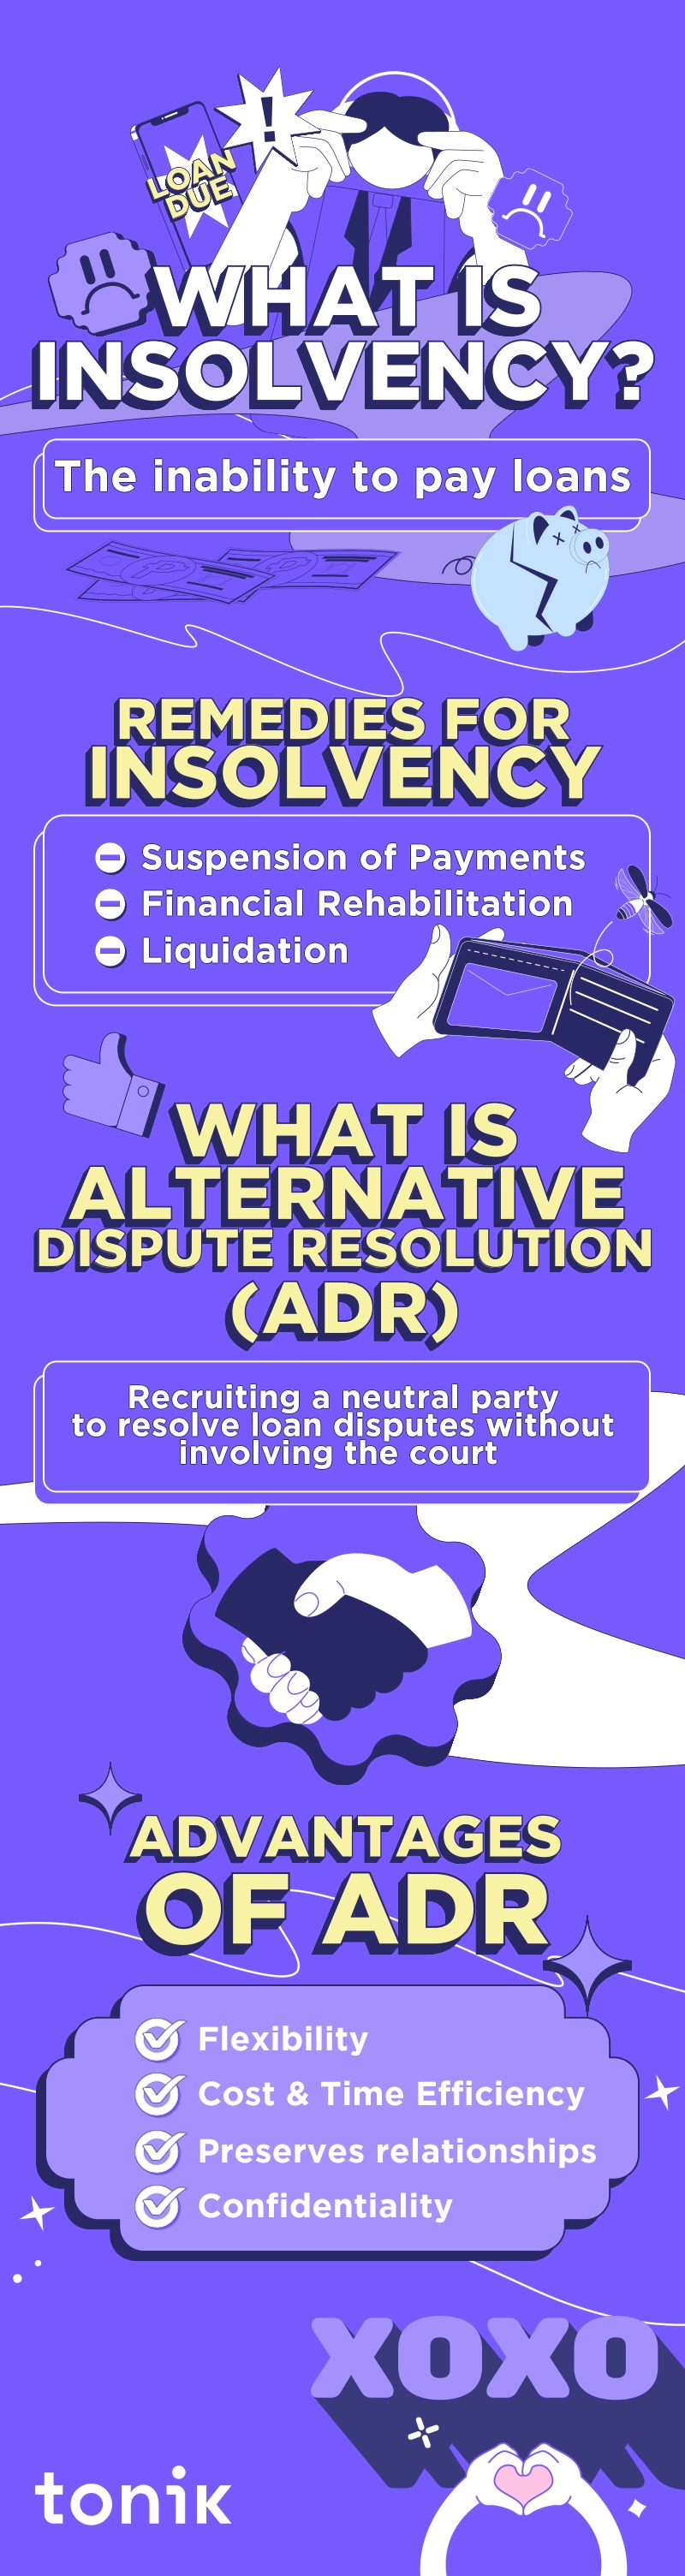 infographic that explains the concept of insolvency and alternative dispute resolution in the Philippines